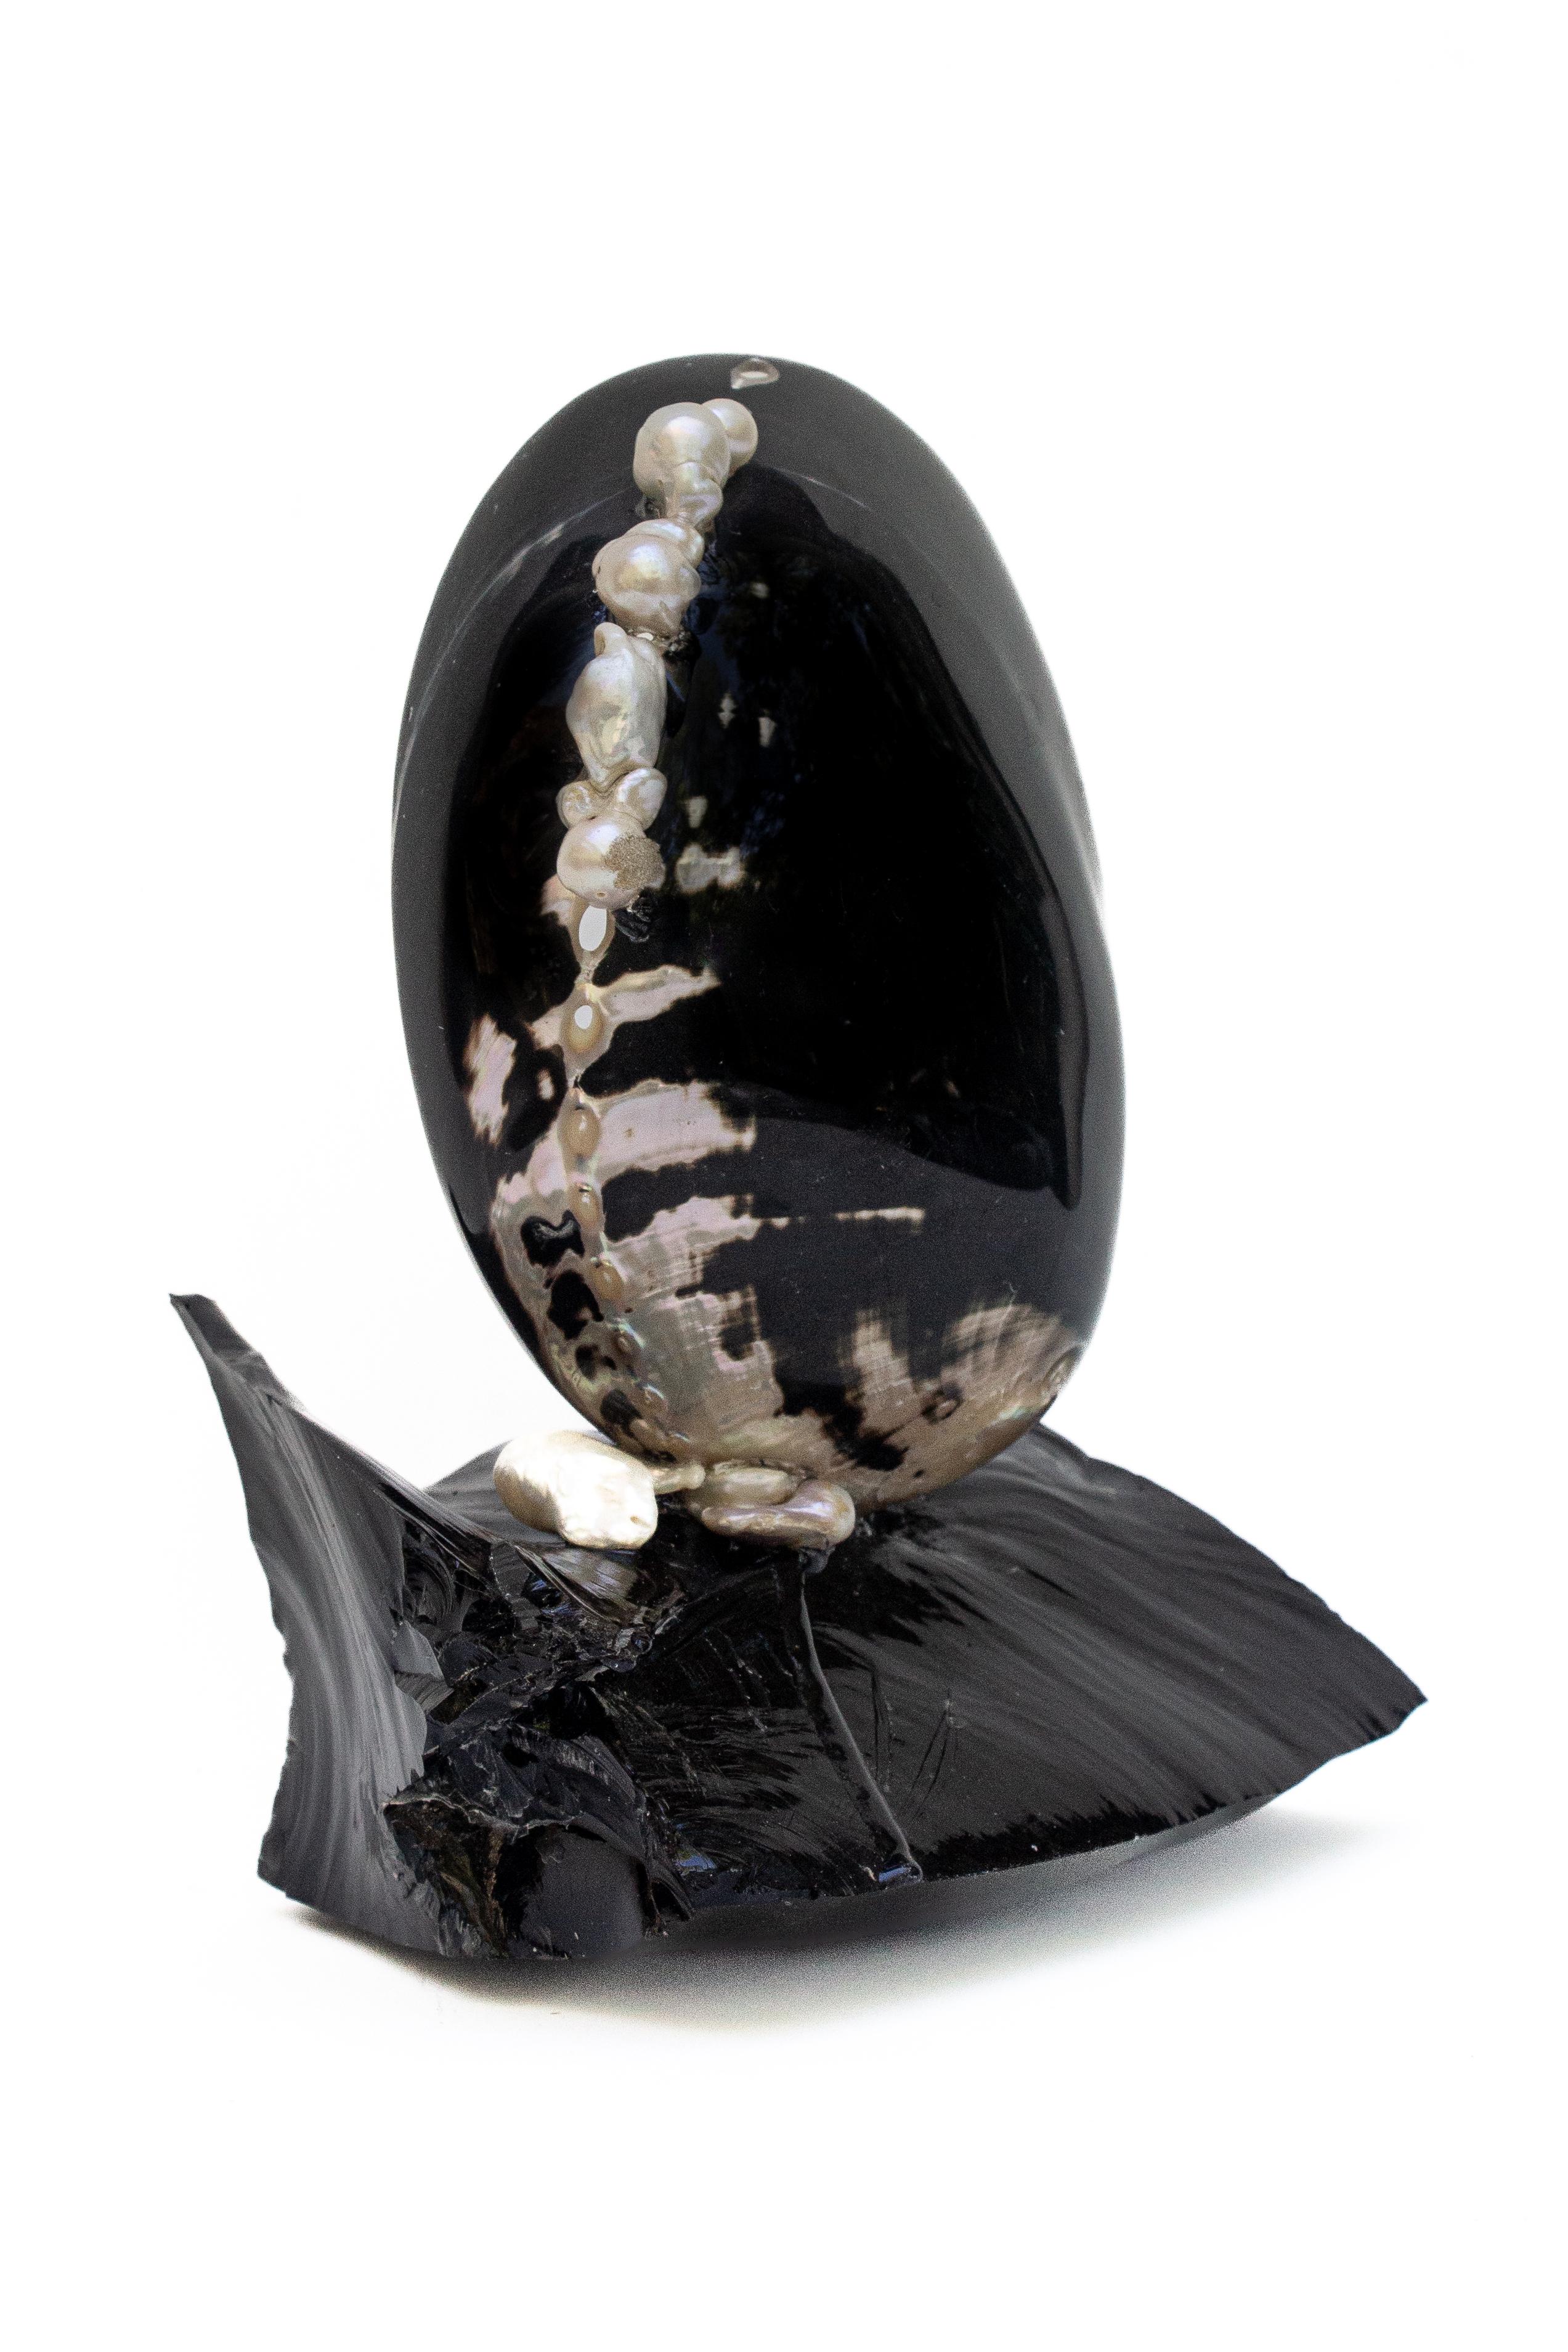 American Black Polished Abalone Shell on Obsidian with Baroque Pearls For Sale